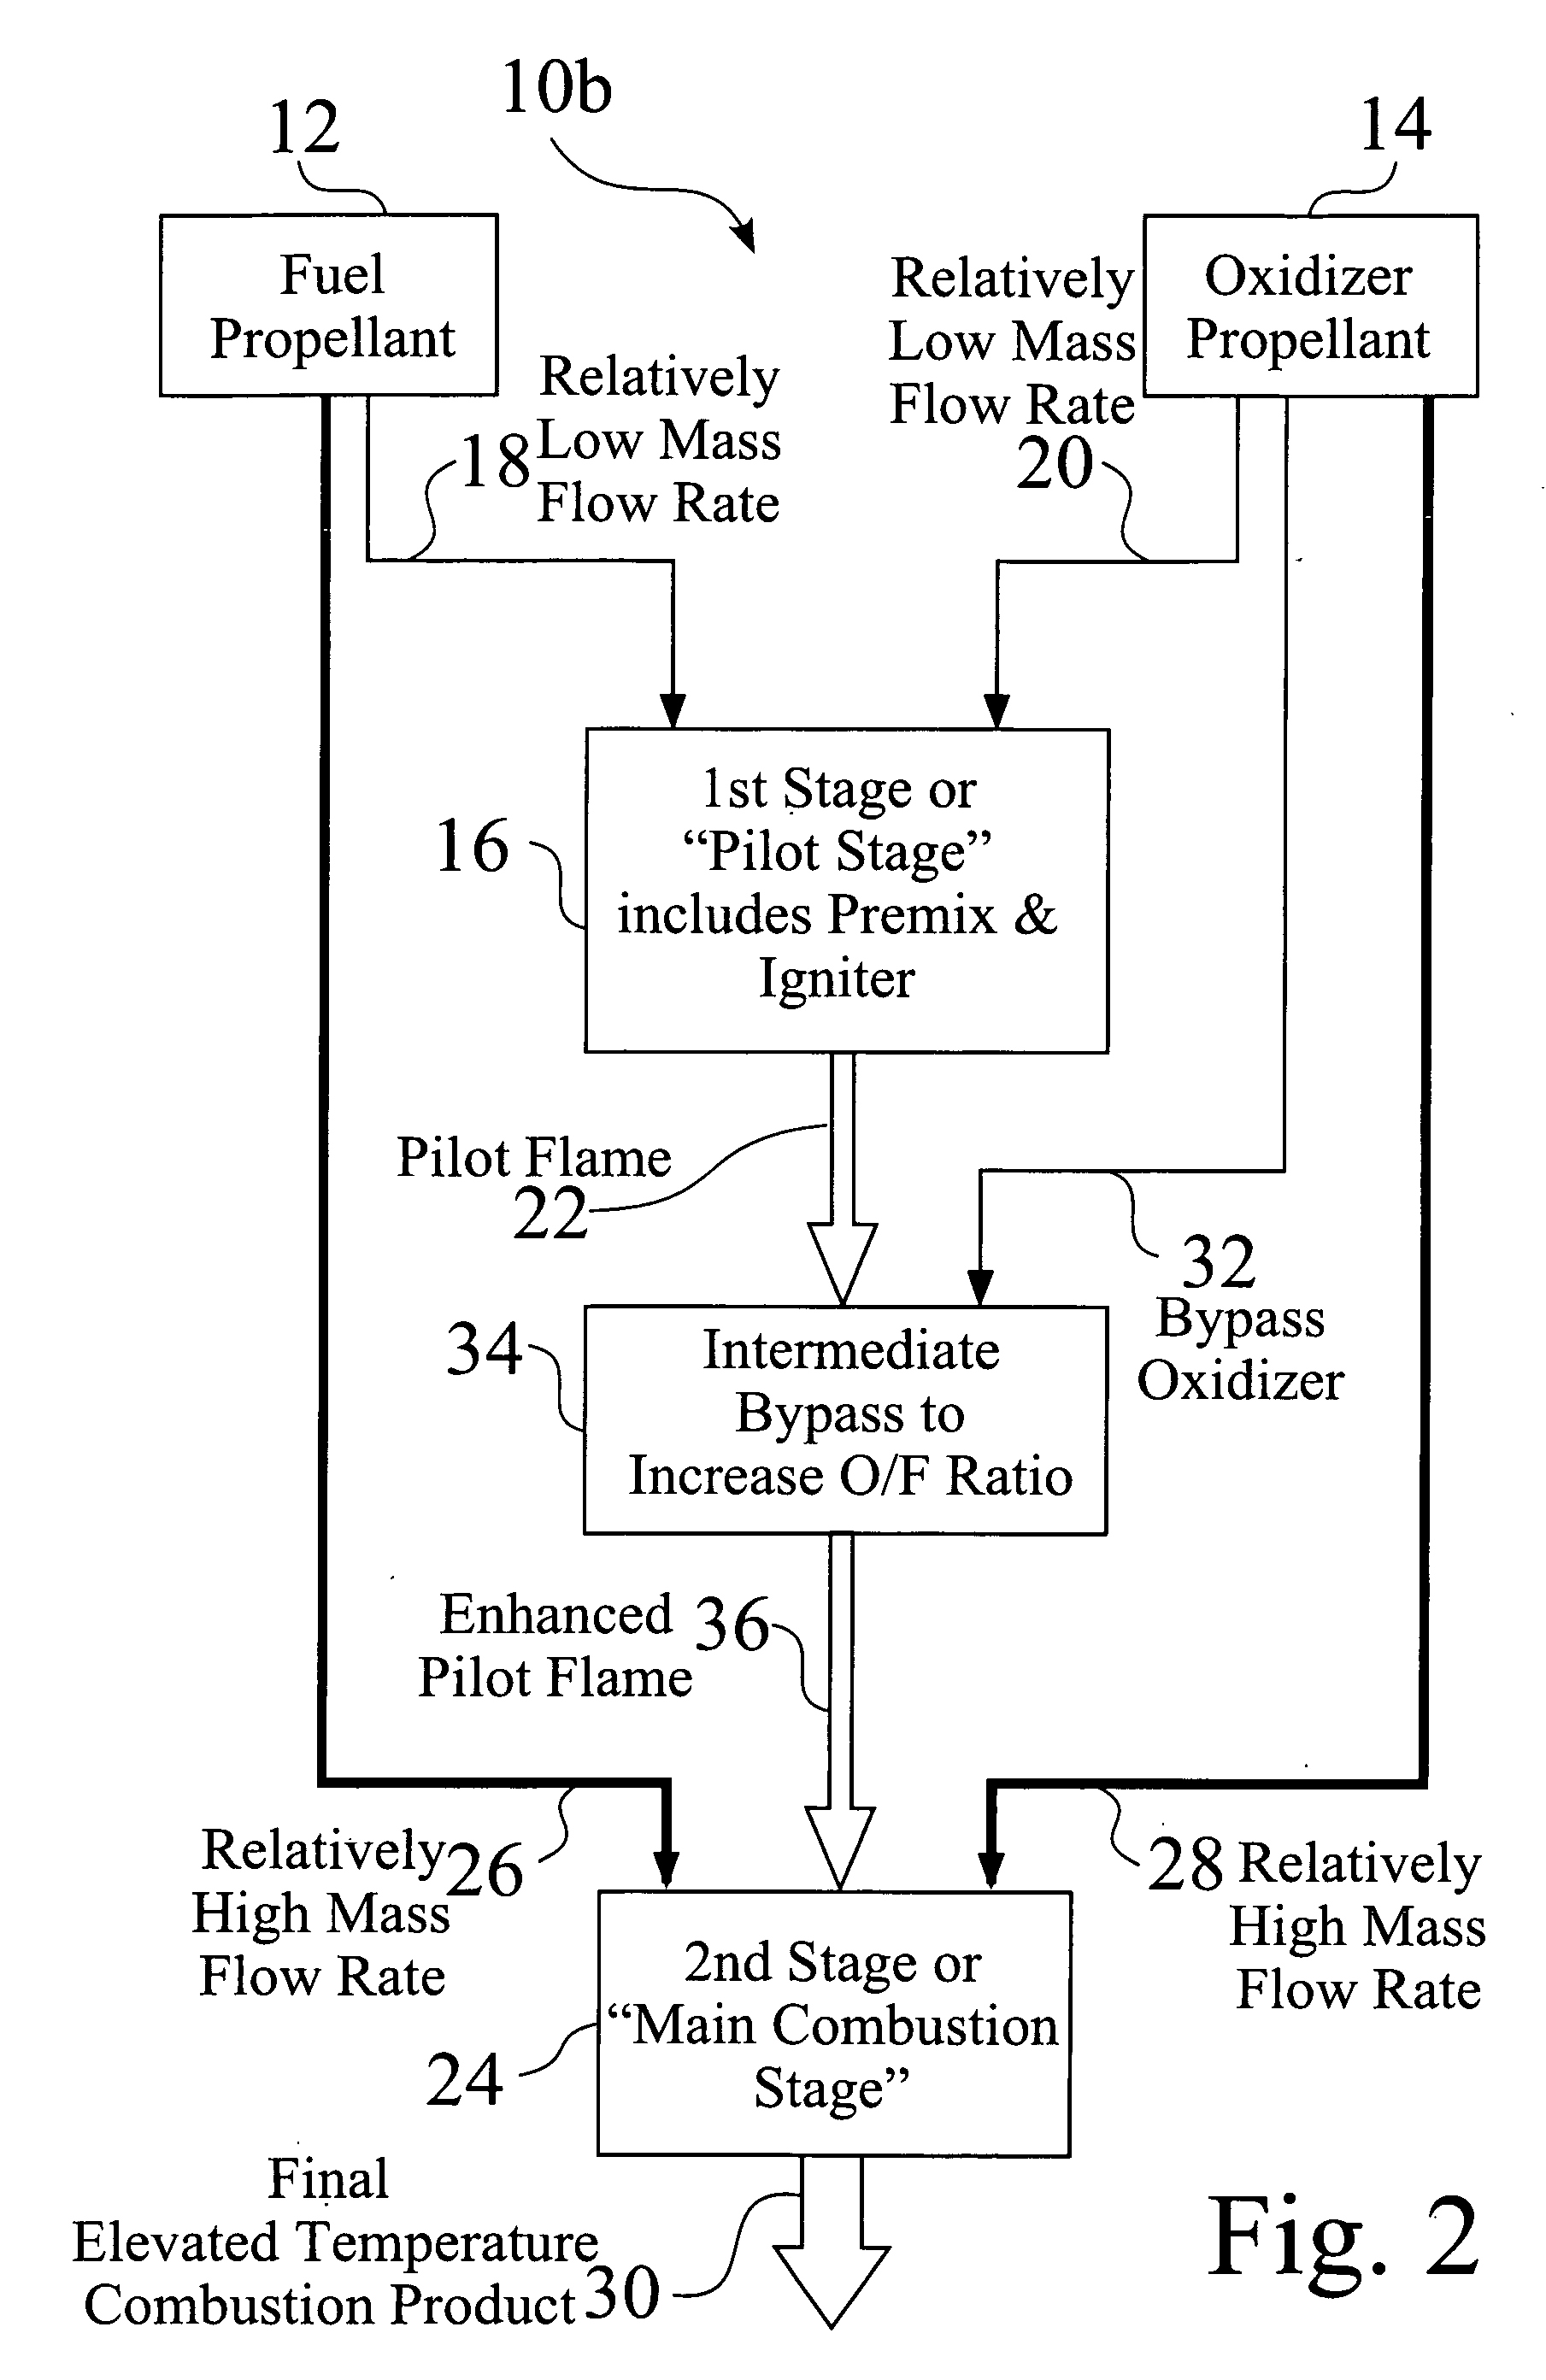 Two-stage ignition system